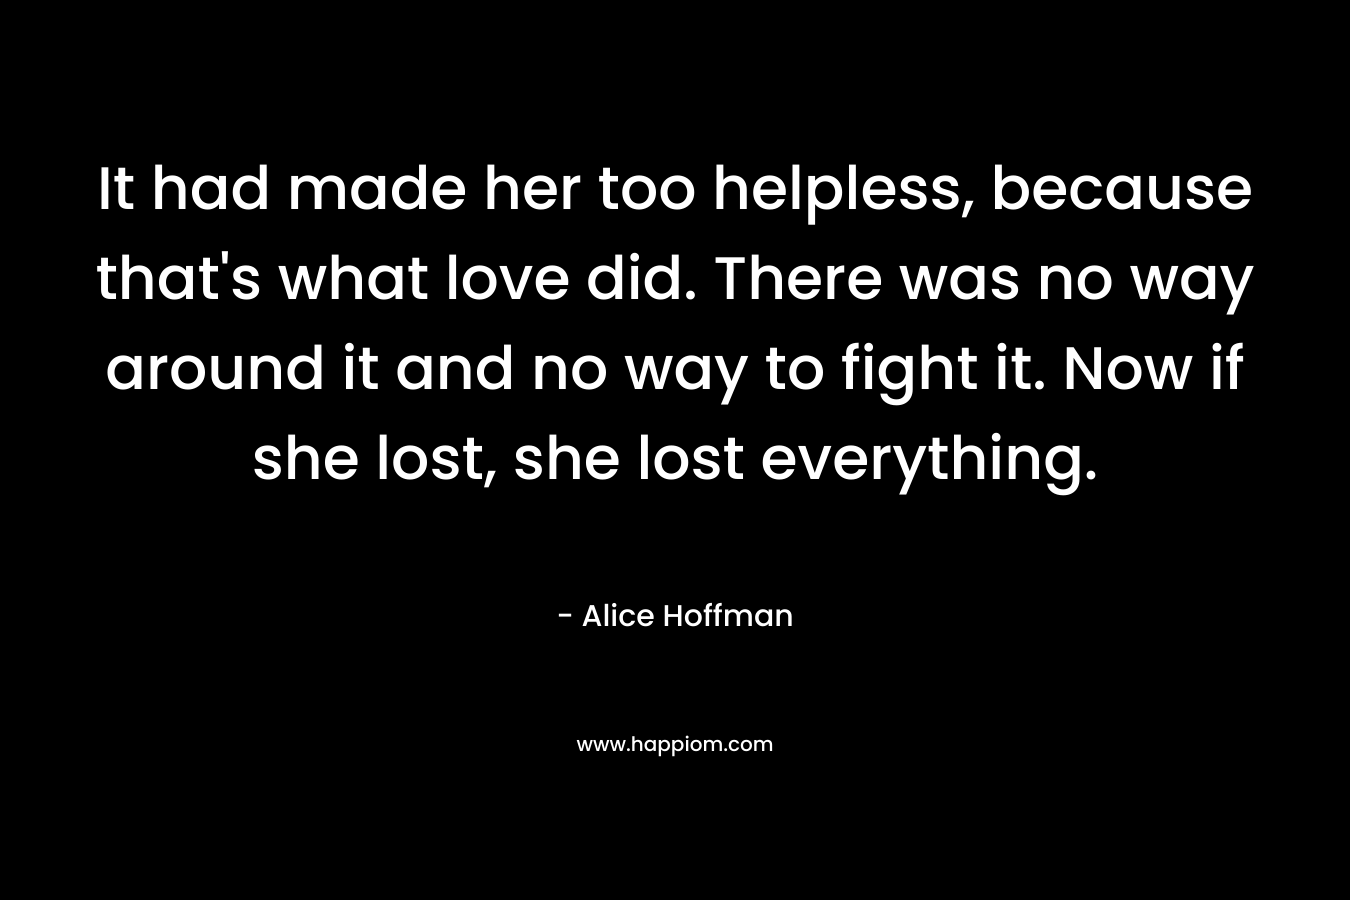 It had made her too helpless, because that’s what love did. There was no way around it and no way to fight it. Now if she lost, she lost everything. – Alice Hoffman